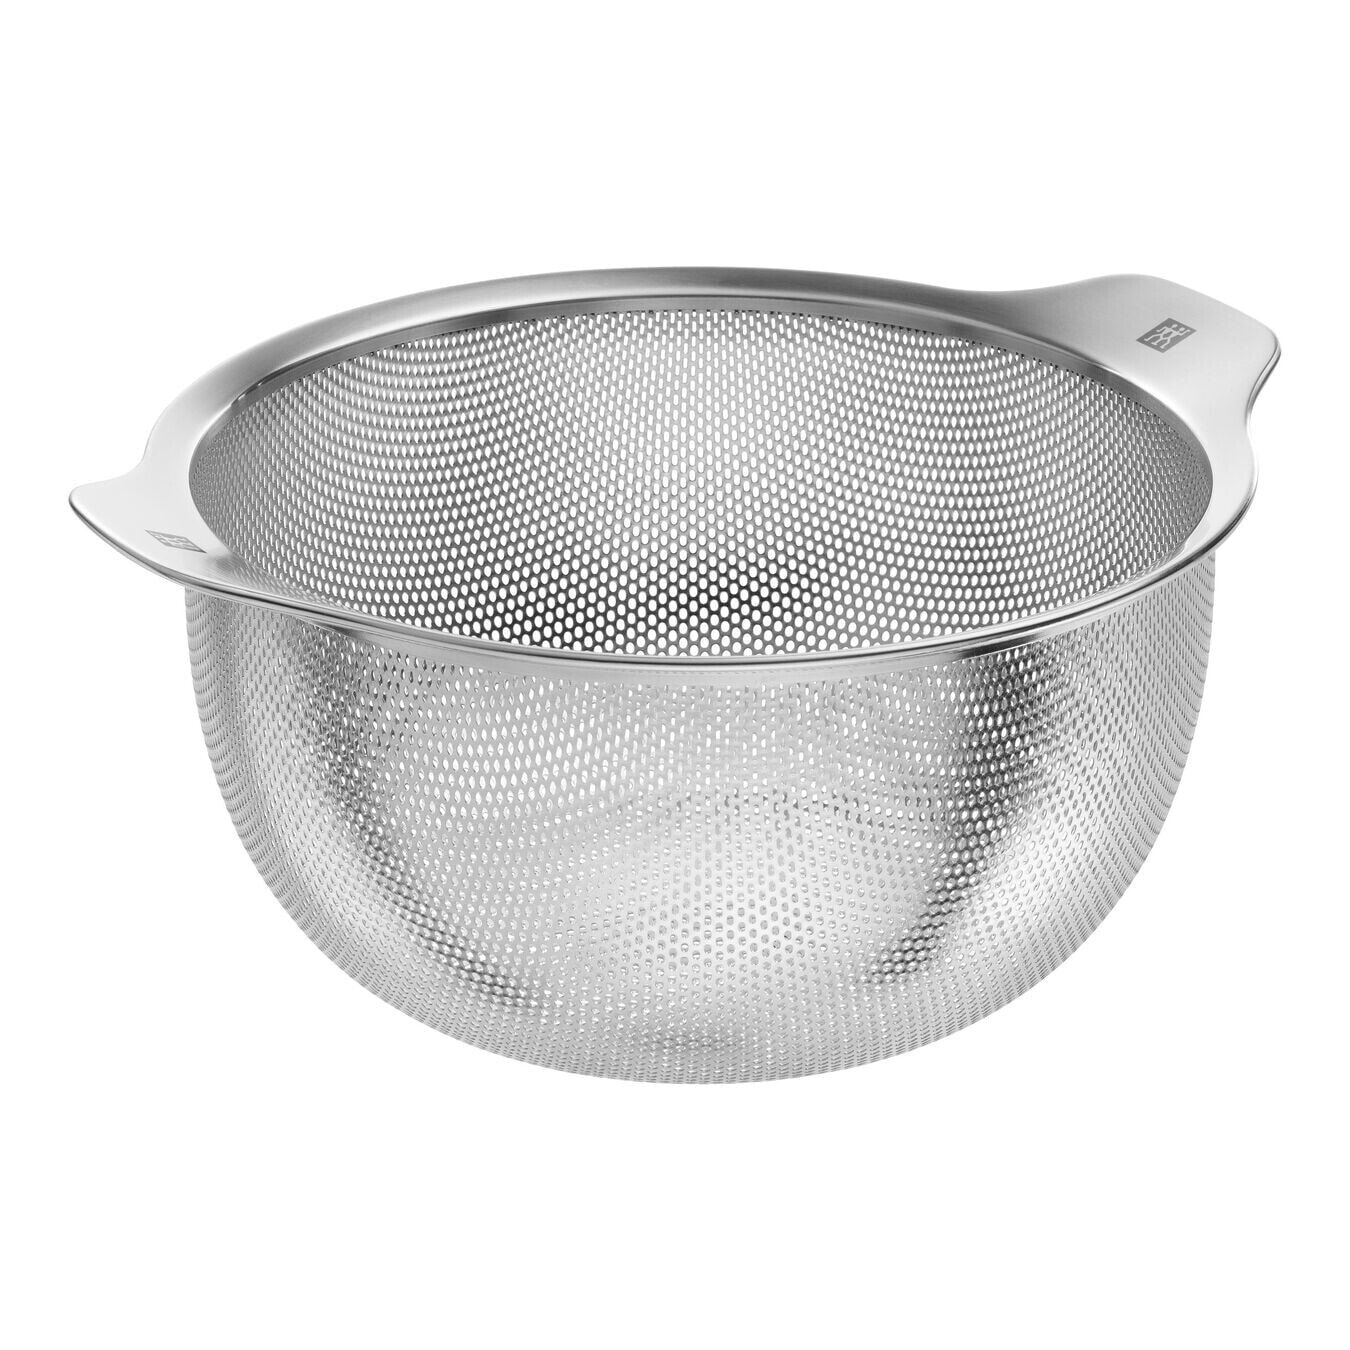 Zwilling 39643-024 - Stainless steel - Silver - Bowl colander - Round - Stainless steel - China